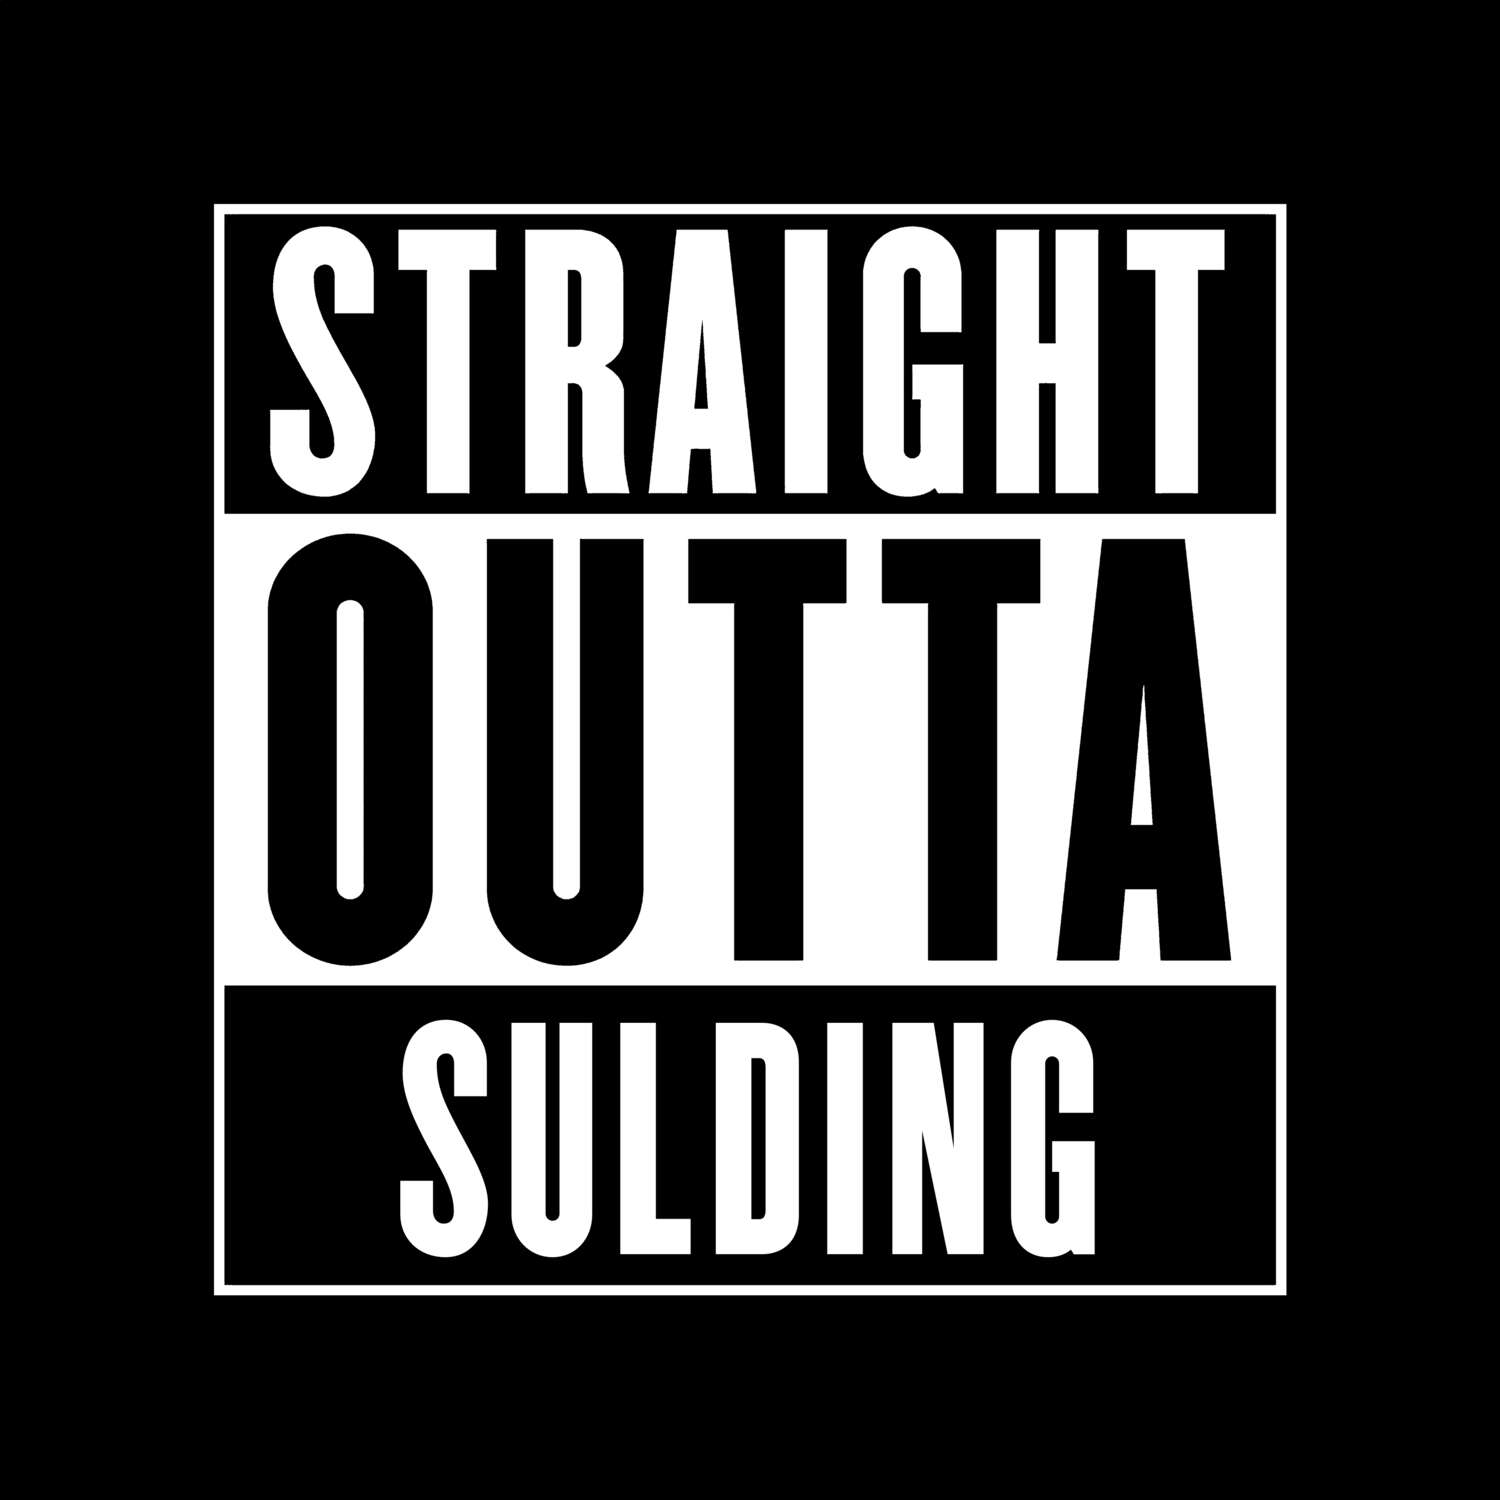 Sulding T-Shirt »Straight Outta«